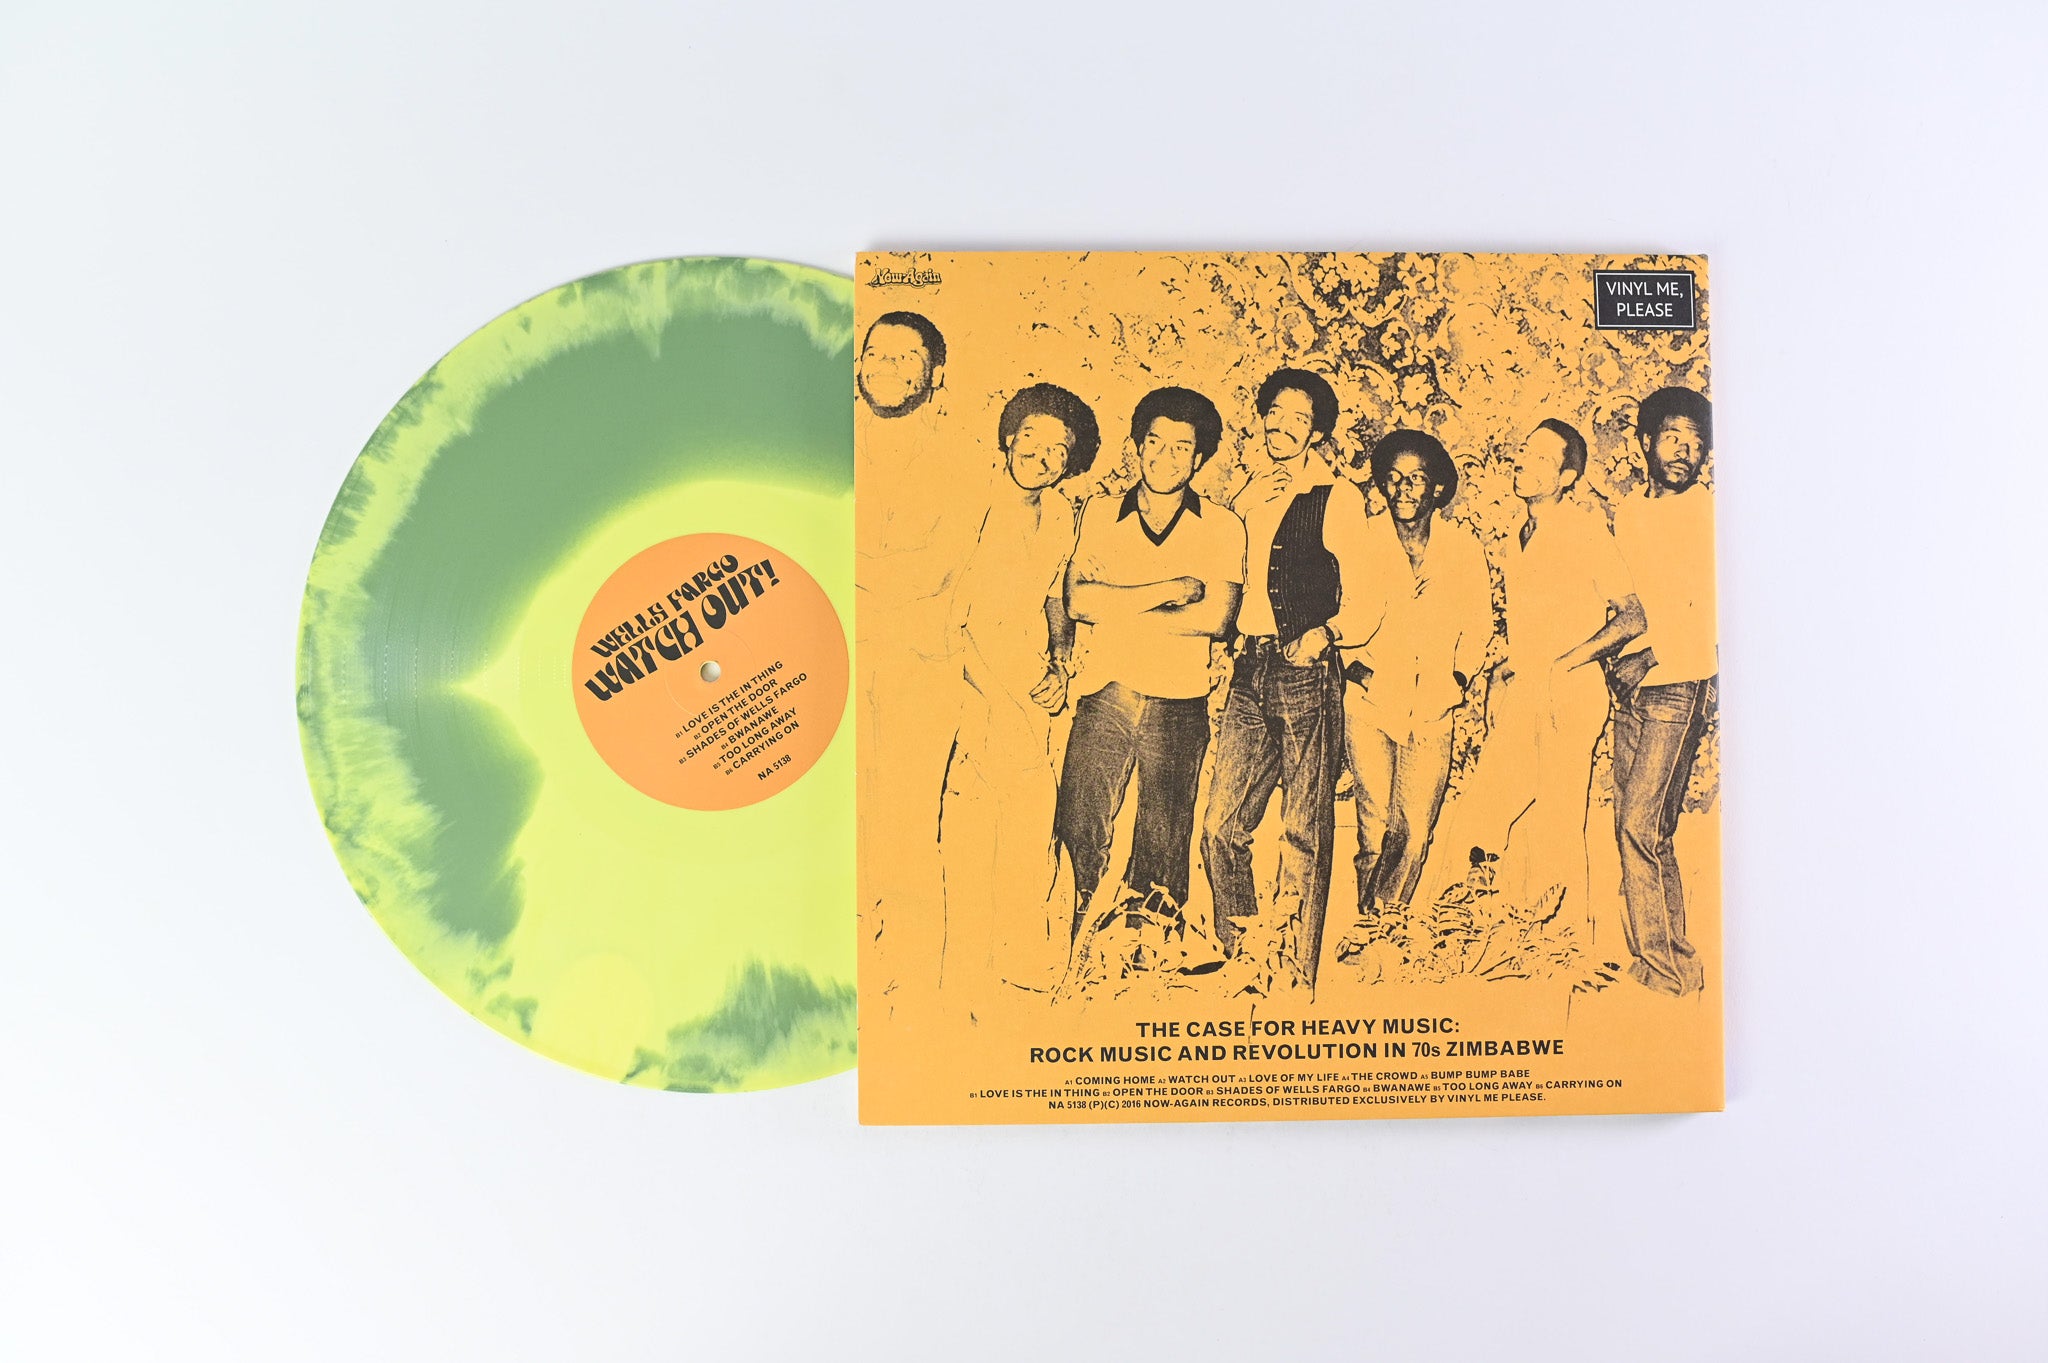 Wells Fargo - Watch Out! on Now-Again / Vinyl Me, Please - Yellow / Green Marbled Colored Vinyl